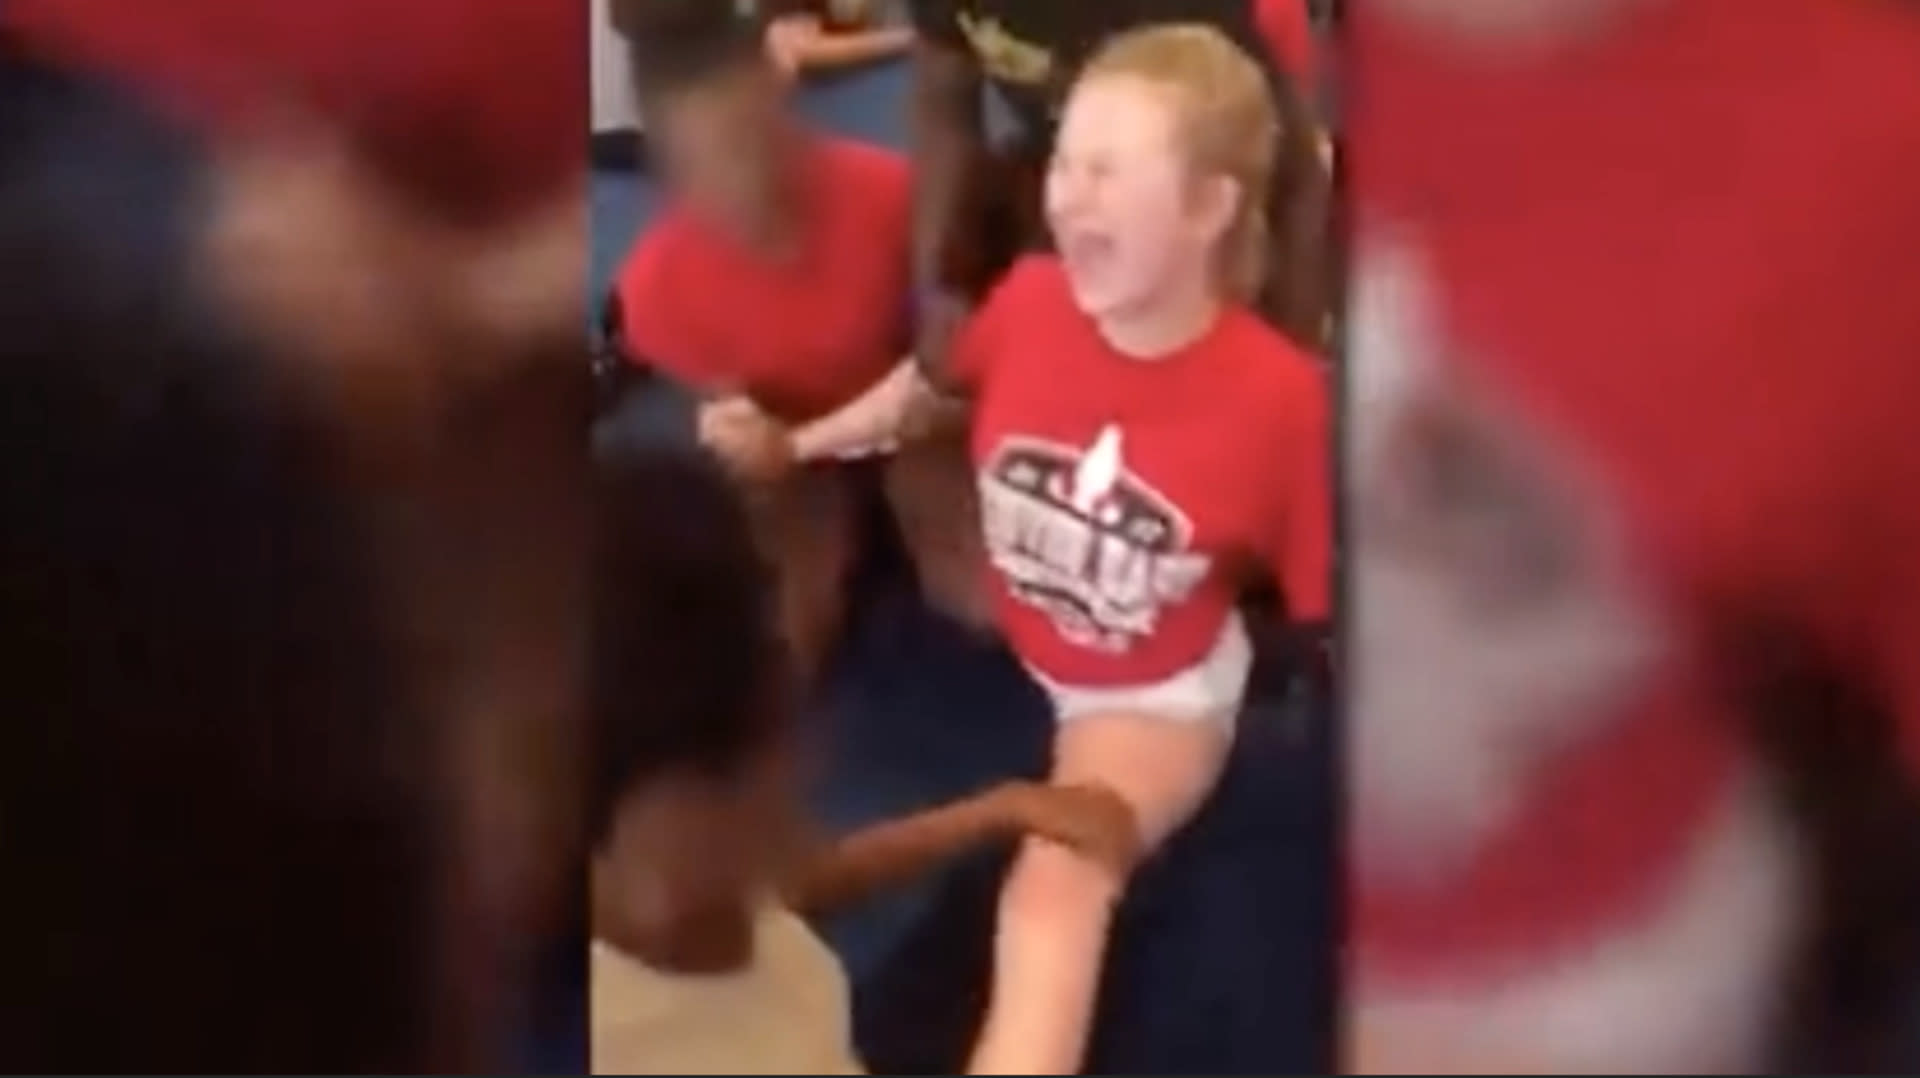 A Disturbing Video Shows A High School Cheerleader Forced Into A Split By Her Coach And Teammates 2332